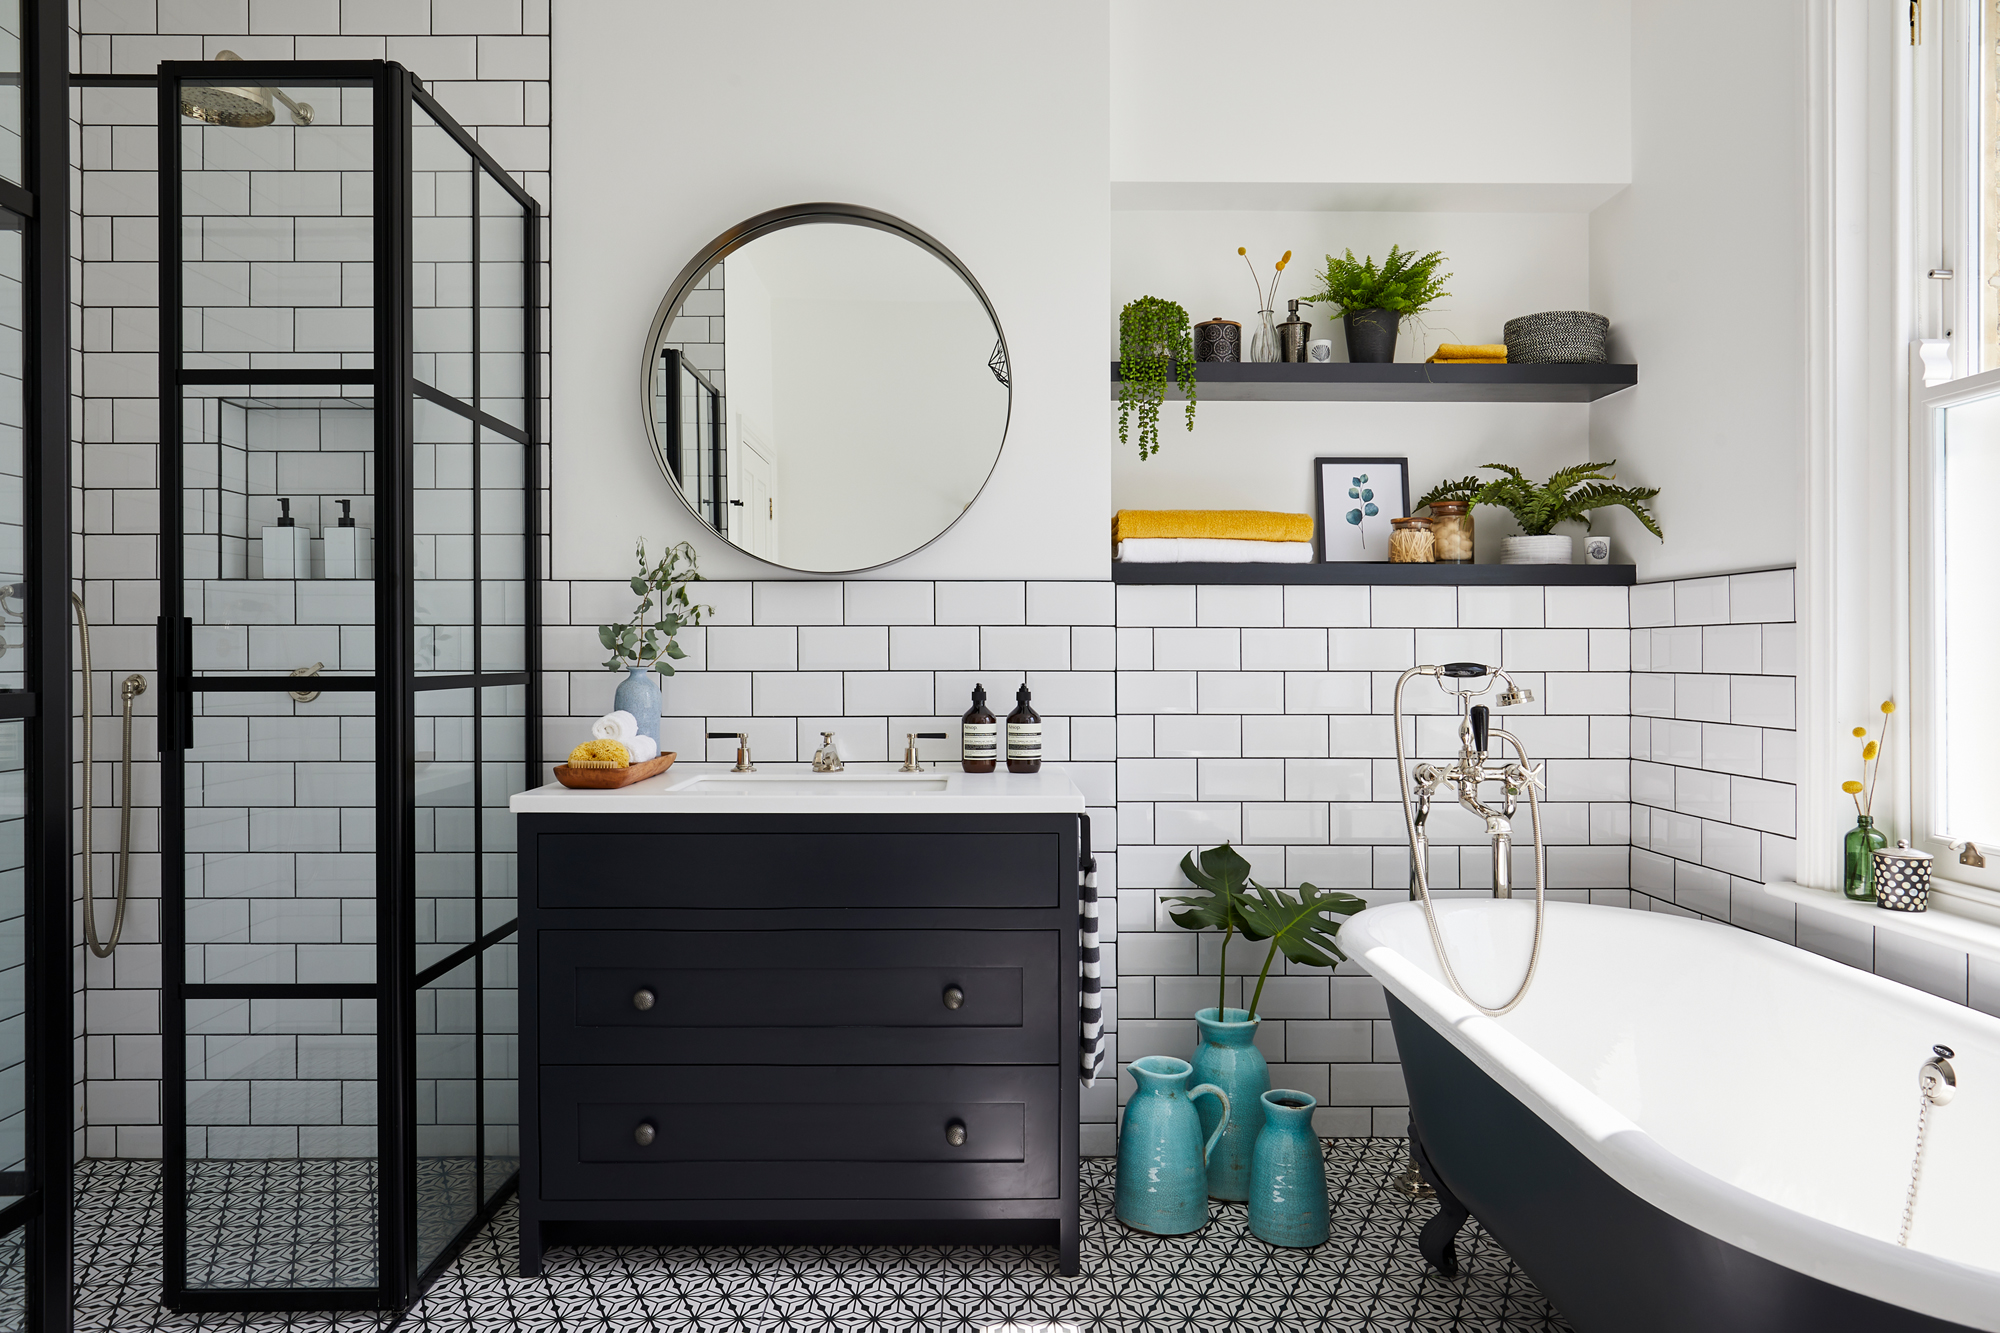 How to design your perfect bathroom